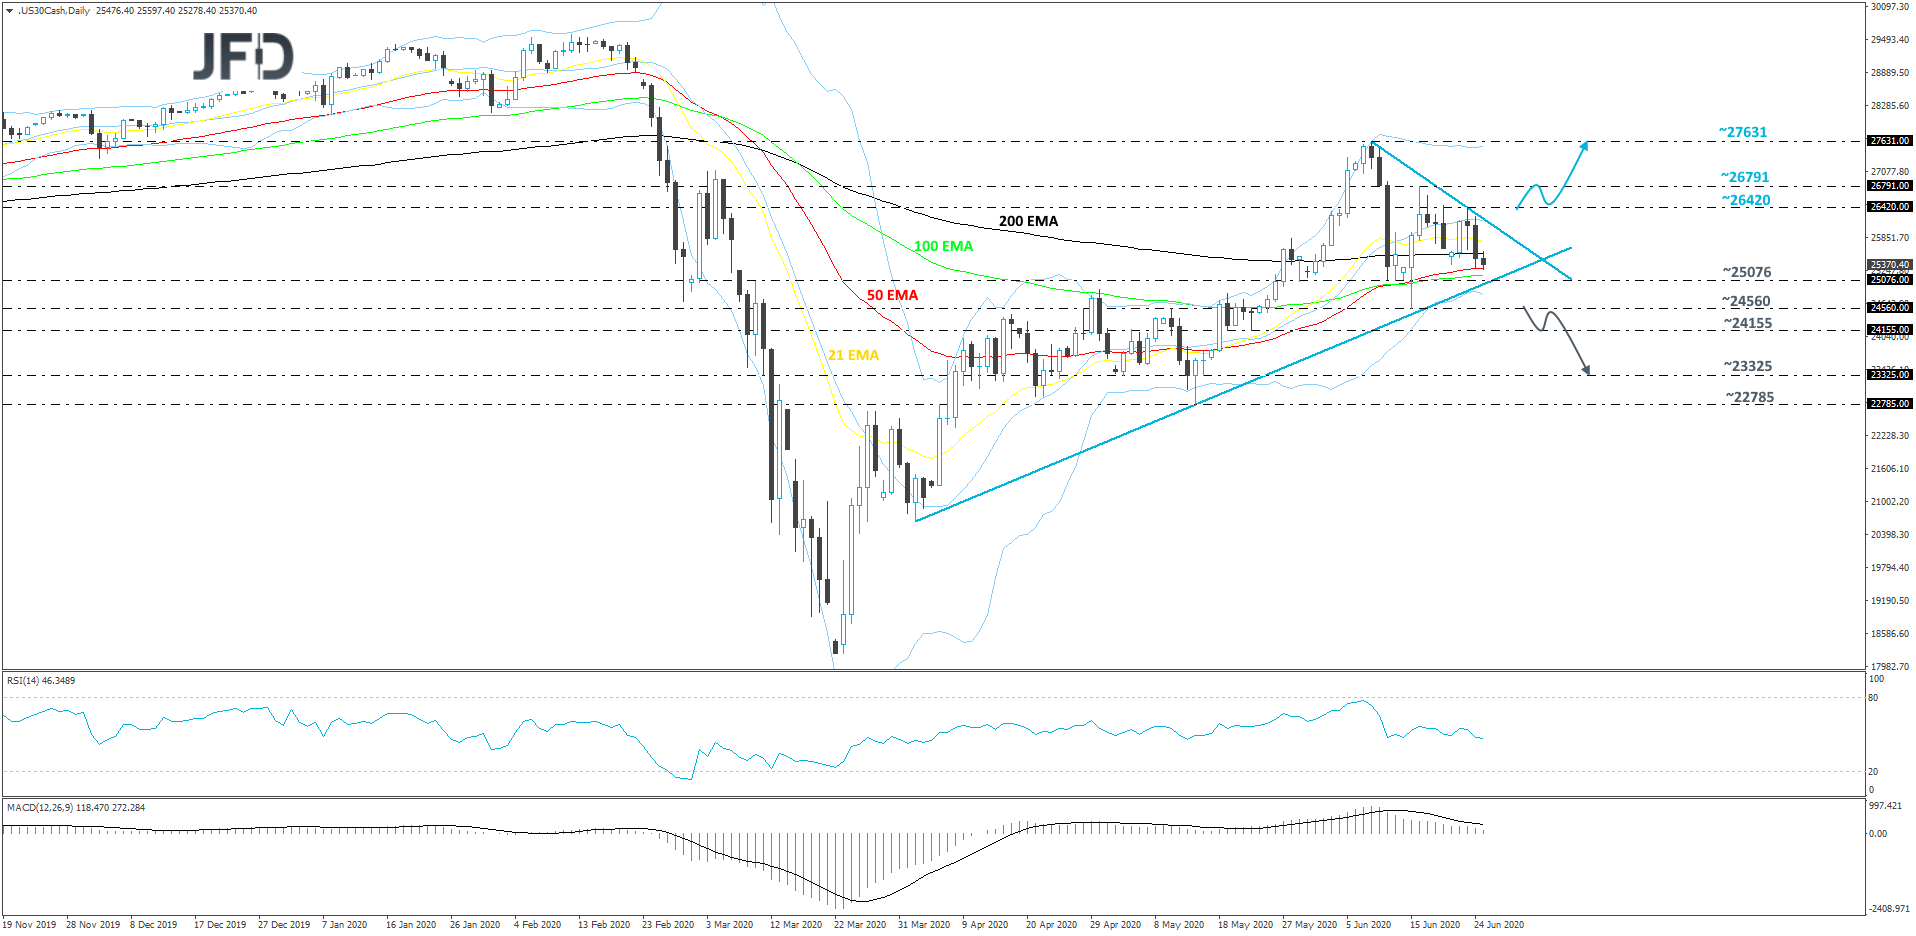 DJIA cash index daily chart technical analysis